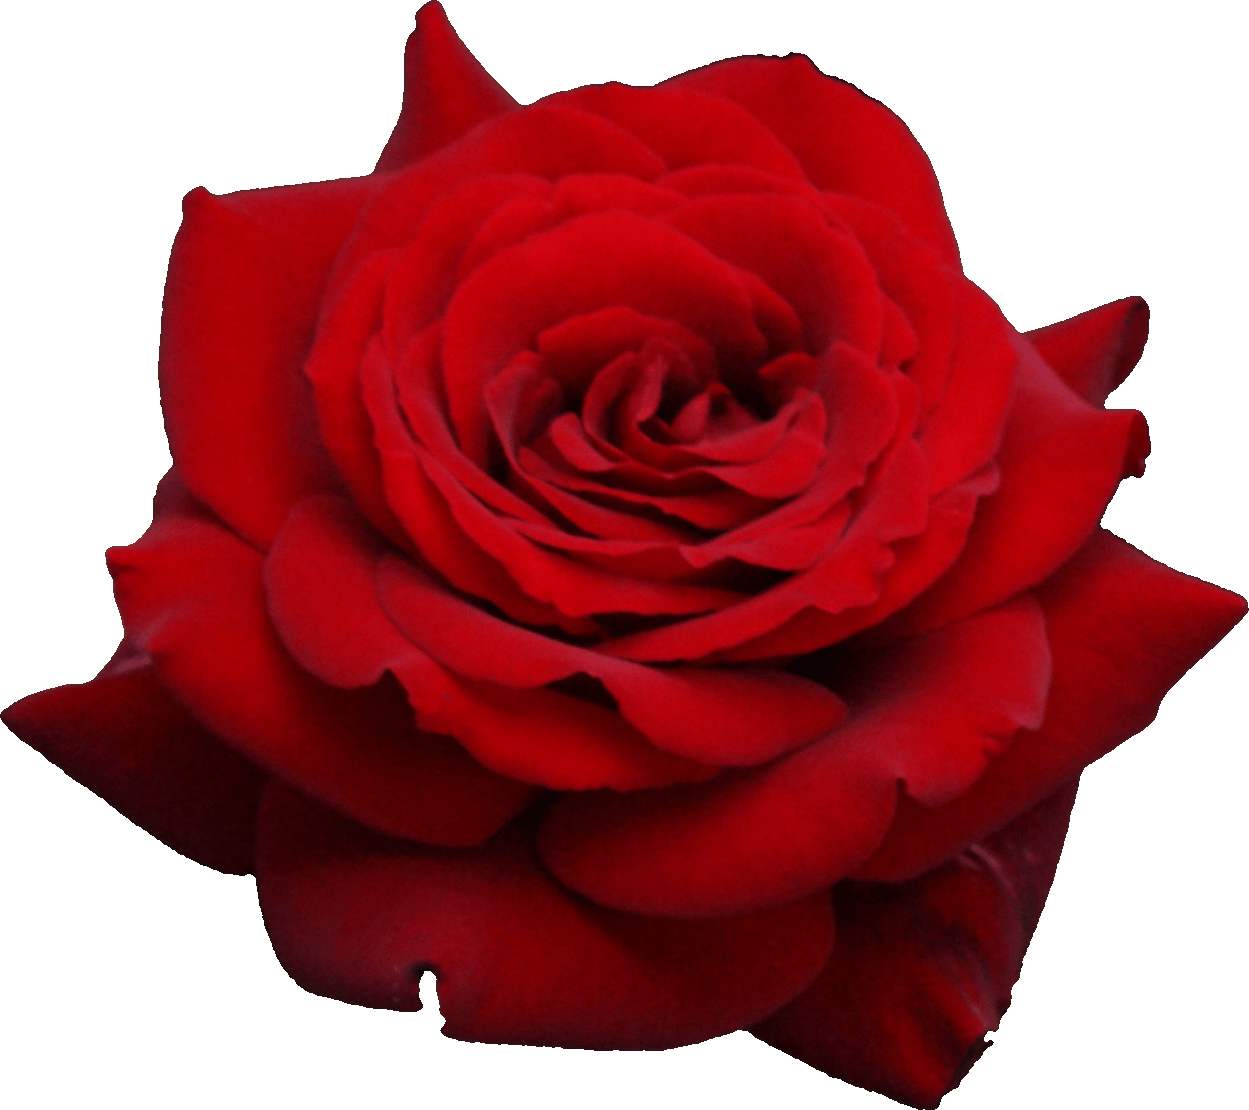 Red Rose Png Image Picture Download PNG Image